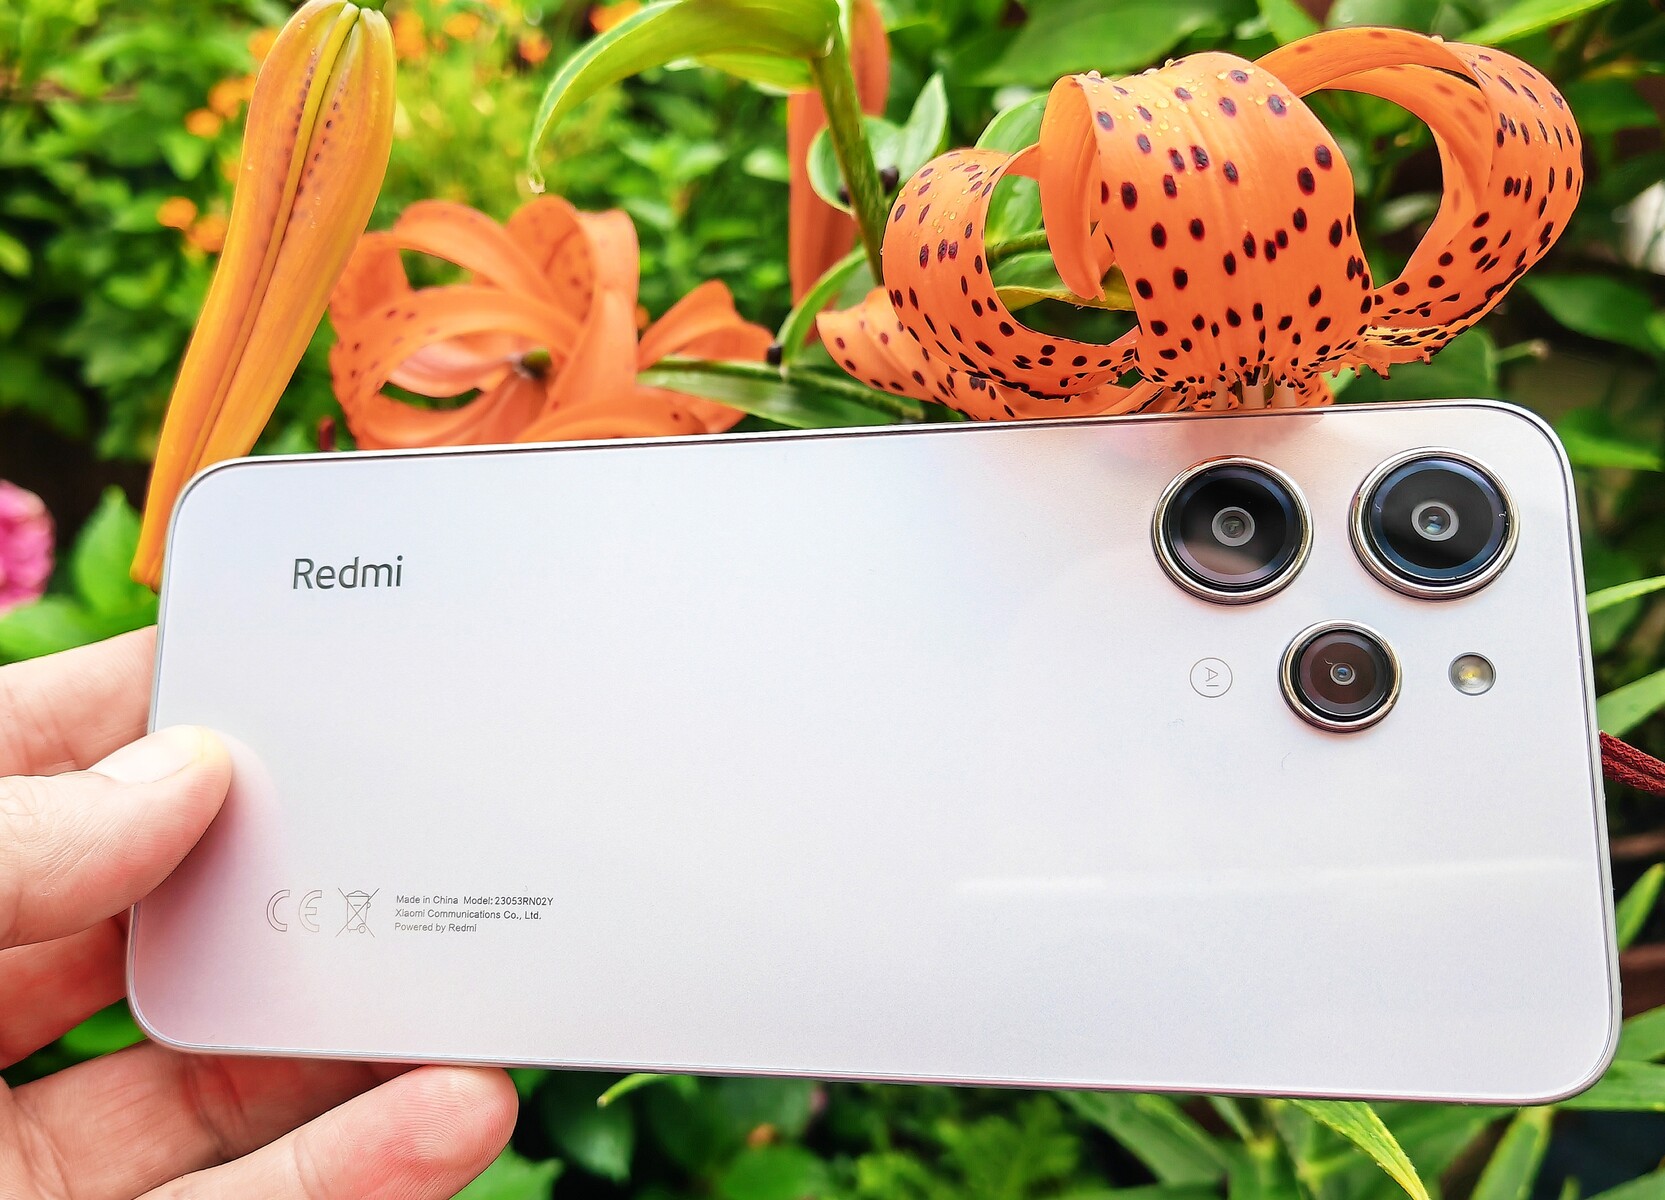 Xiaomi camera app: Here's what those modes, settings do